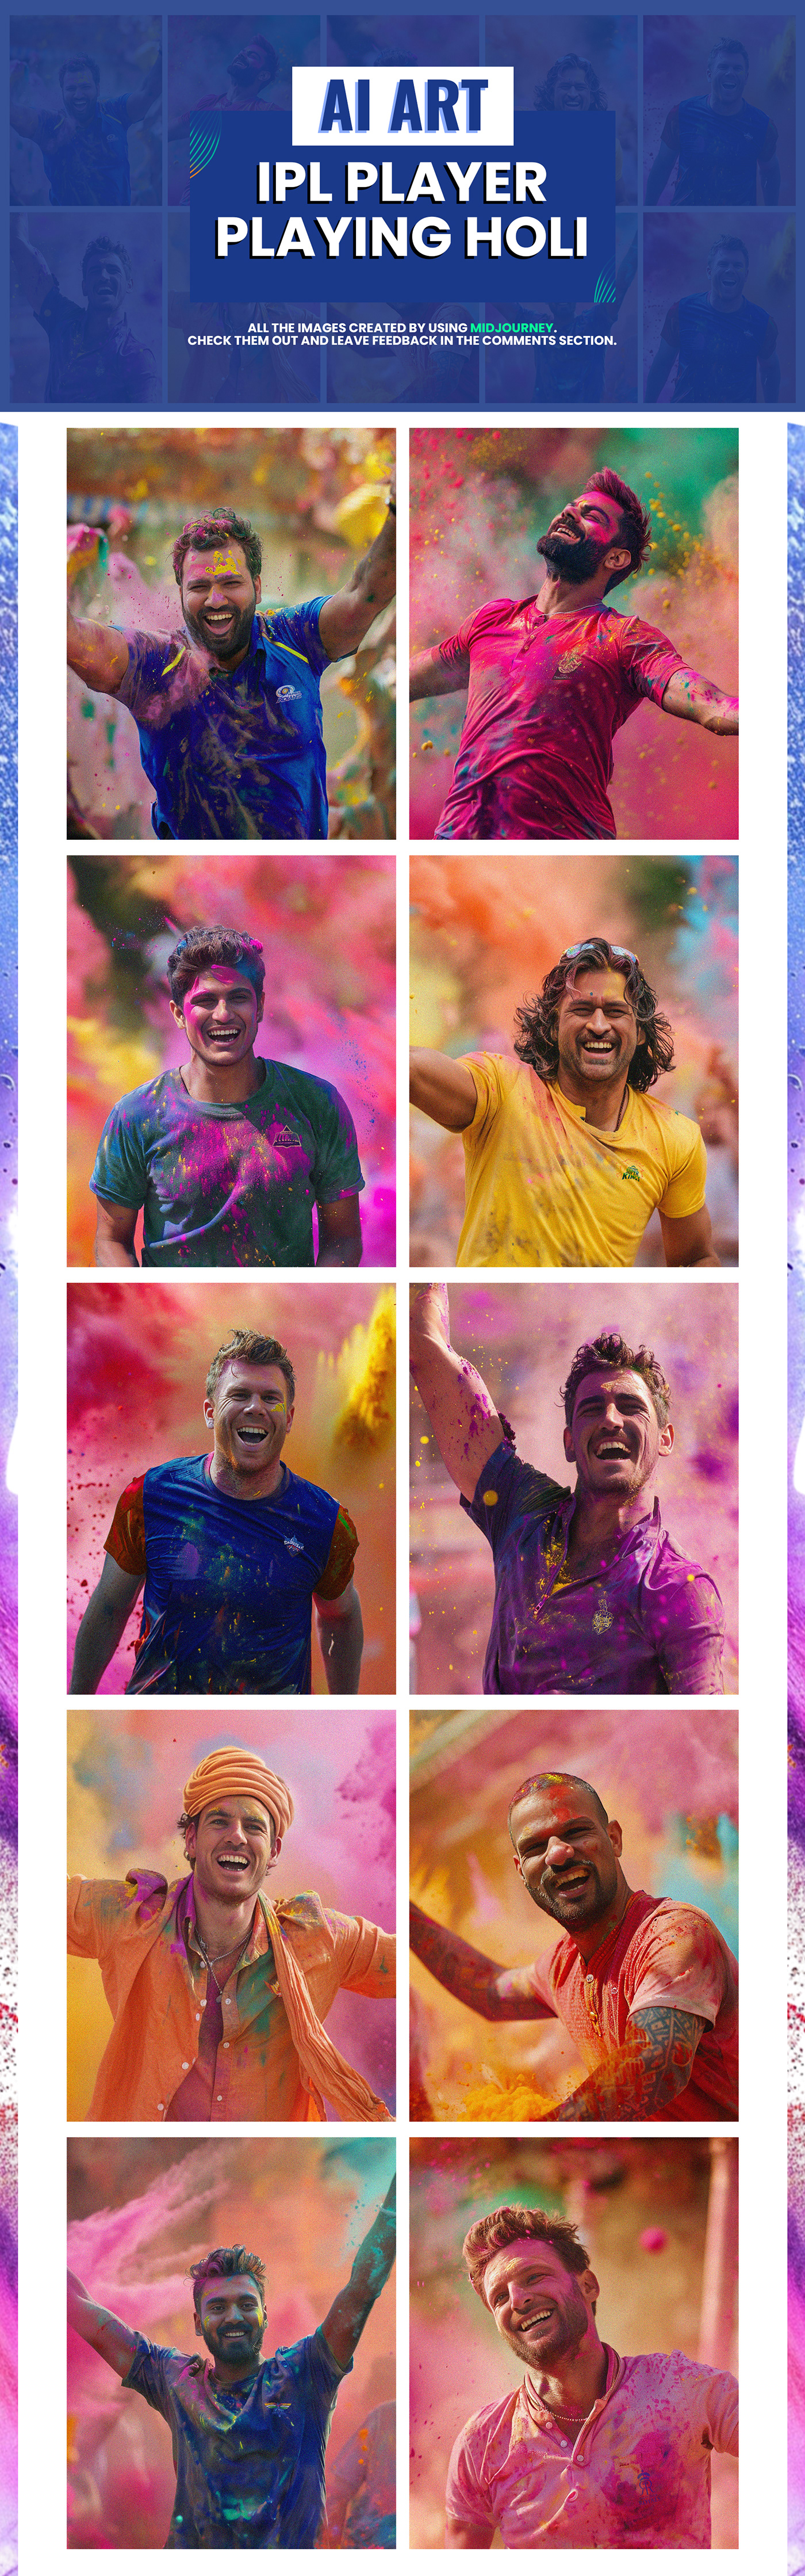 Images created by using Midjourney. Tried to capture all the emotions and excitement of players.